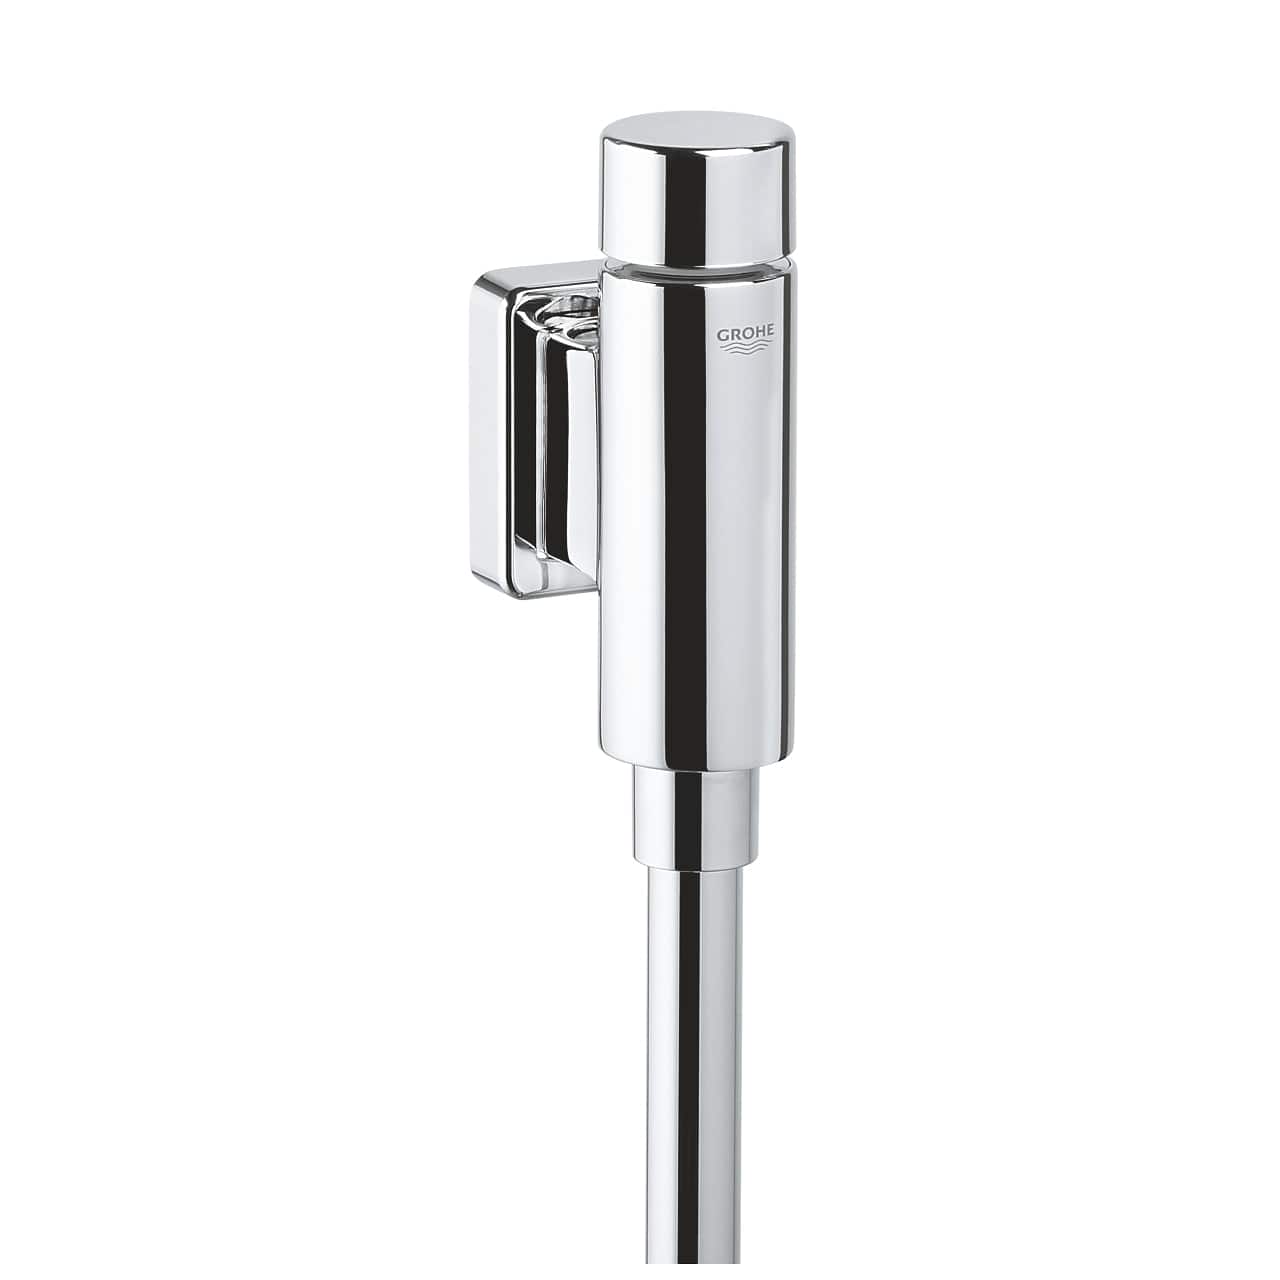 Grohe Rondo Flush Valve for Urinal | Supply Master | Accra, Ghana Bathroom Accessories Buy Tools hardware Building materials